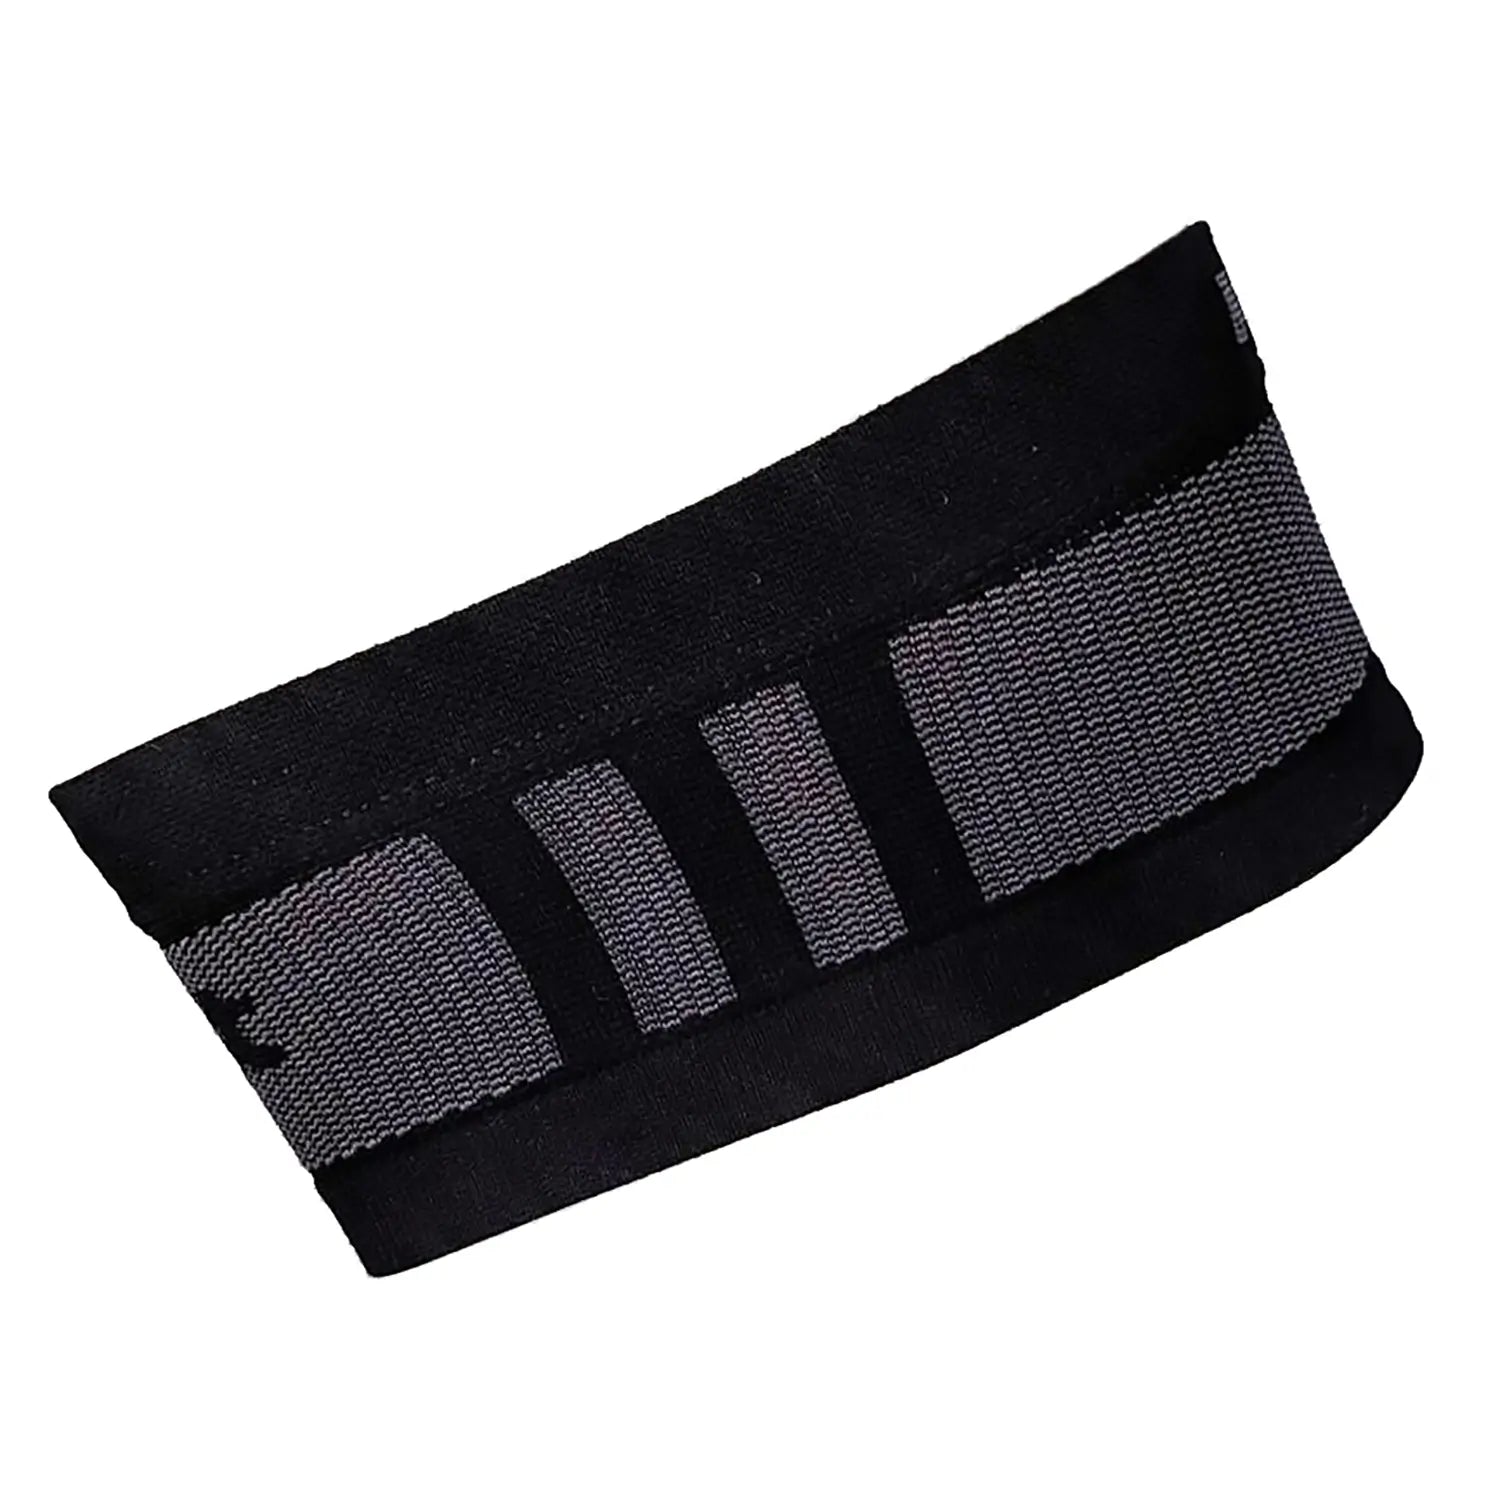 IT3 Performance ITB Sleeve For Pain Relief